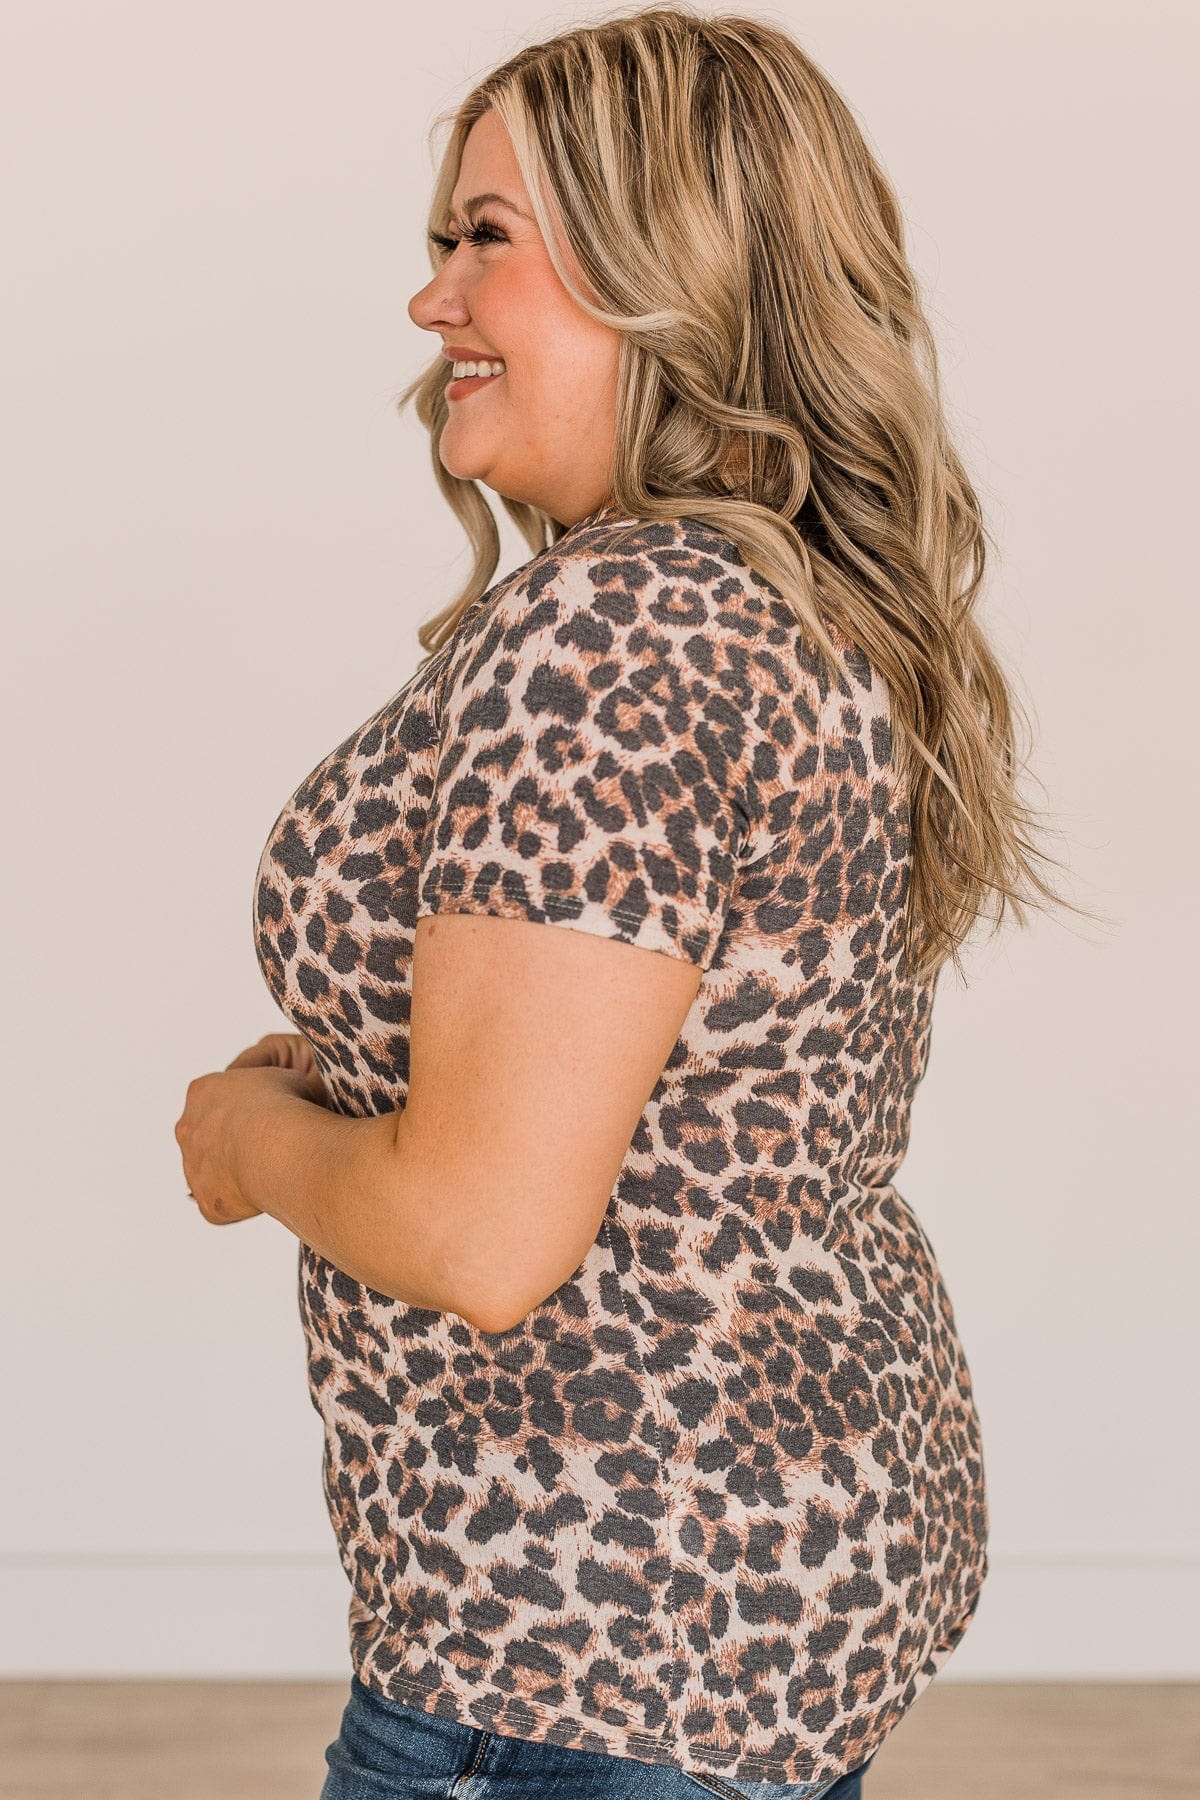 One Day Soon Cutout Top- Leopard